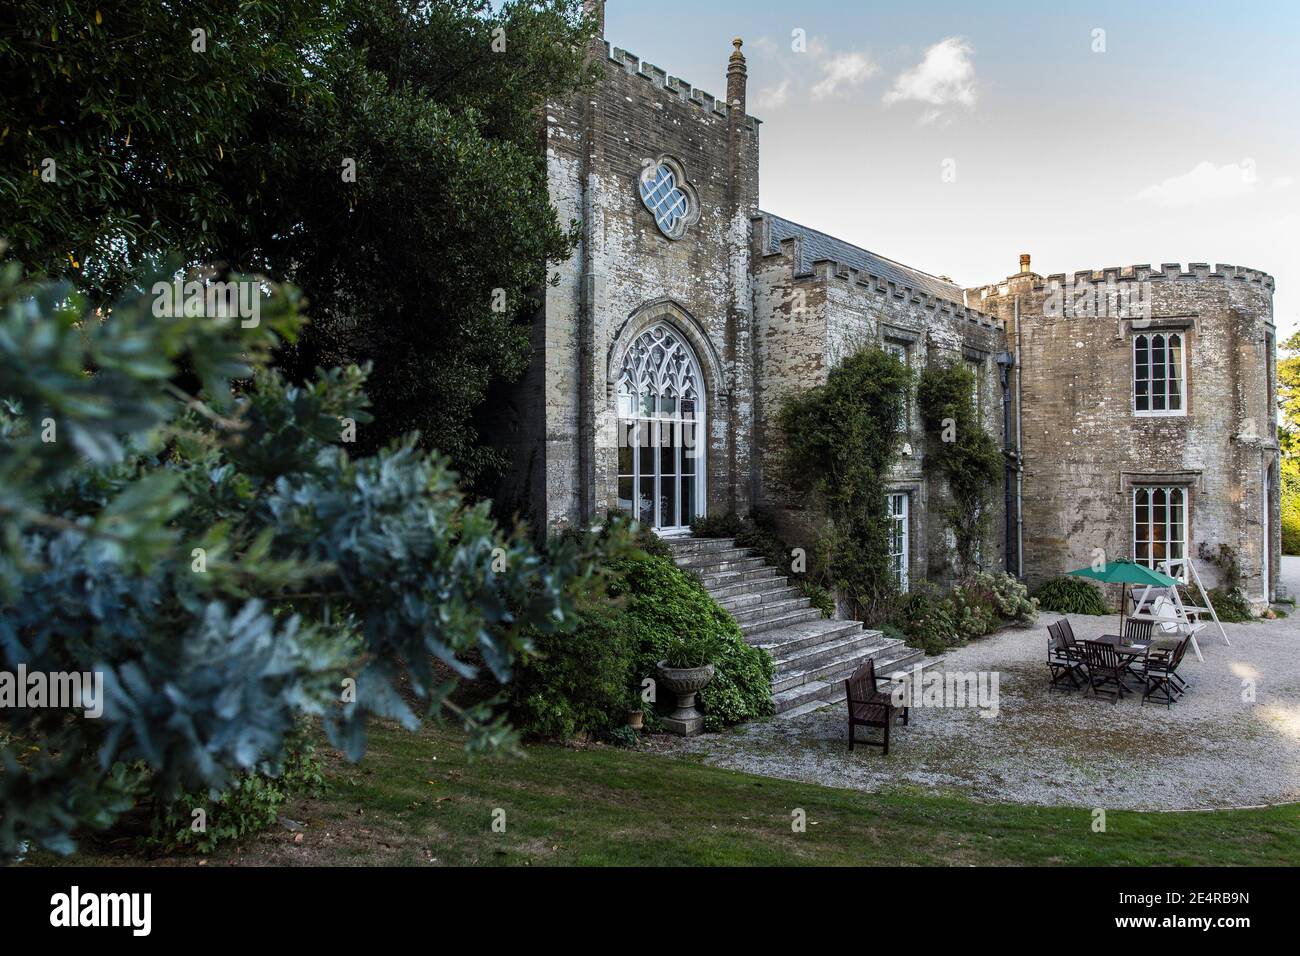 GREAT BRITAIN/ England / Cornwall / Exterior of Pridequx Palace in  Padstow, United Kingdom. Stock Photo